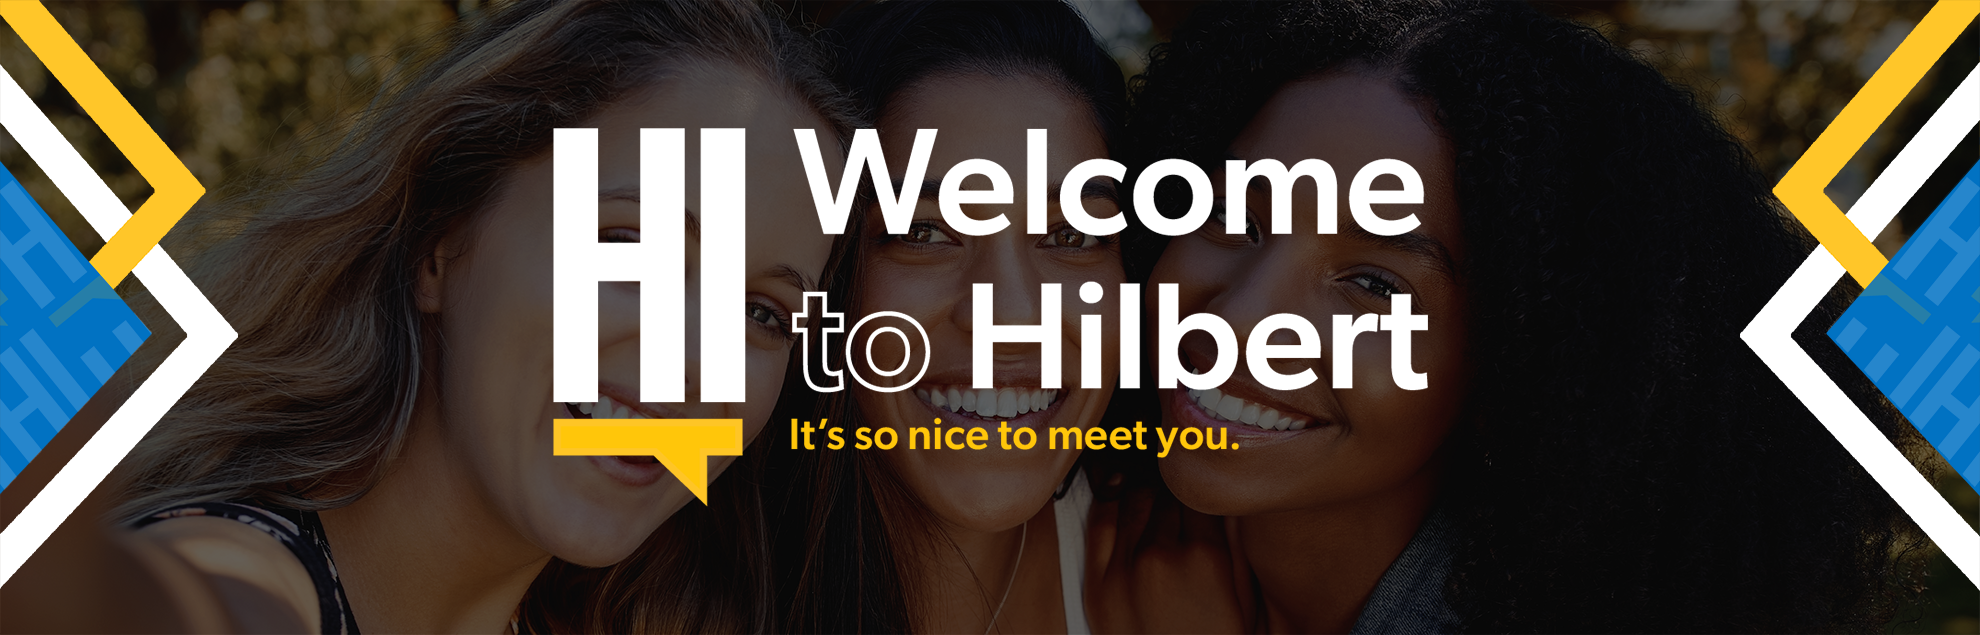 Hi. Welcome to Hilbert. It's so nice to meet you.